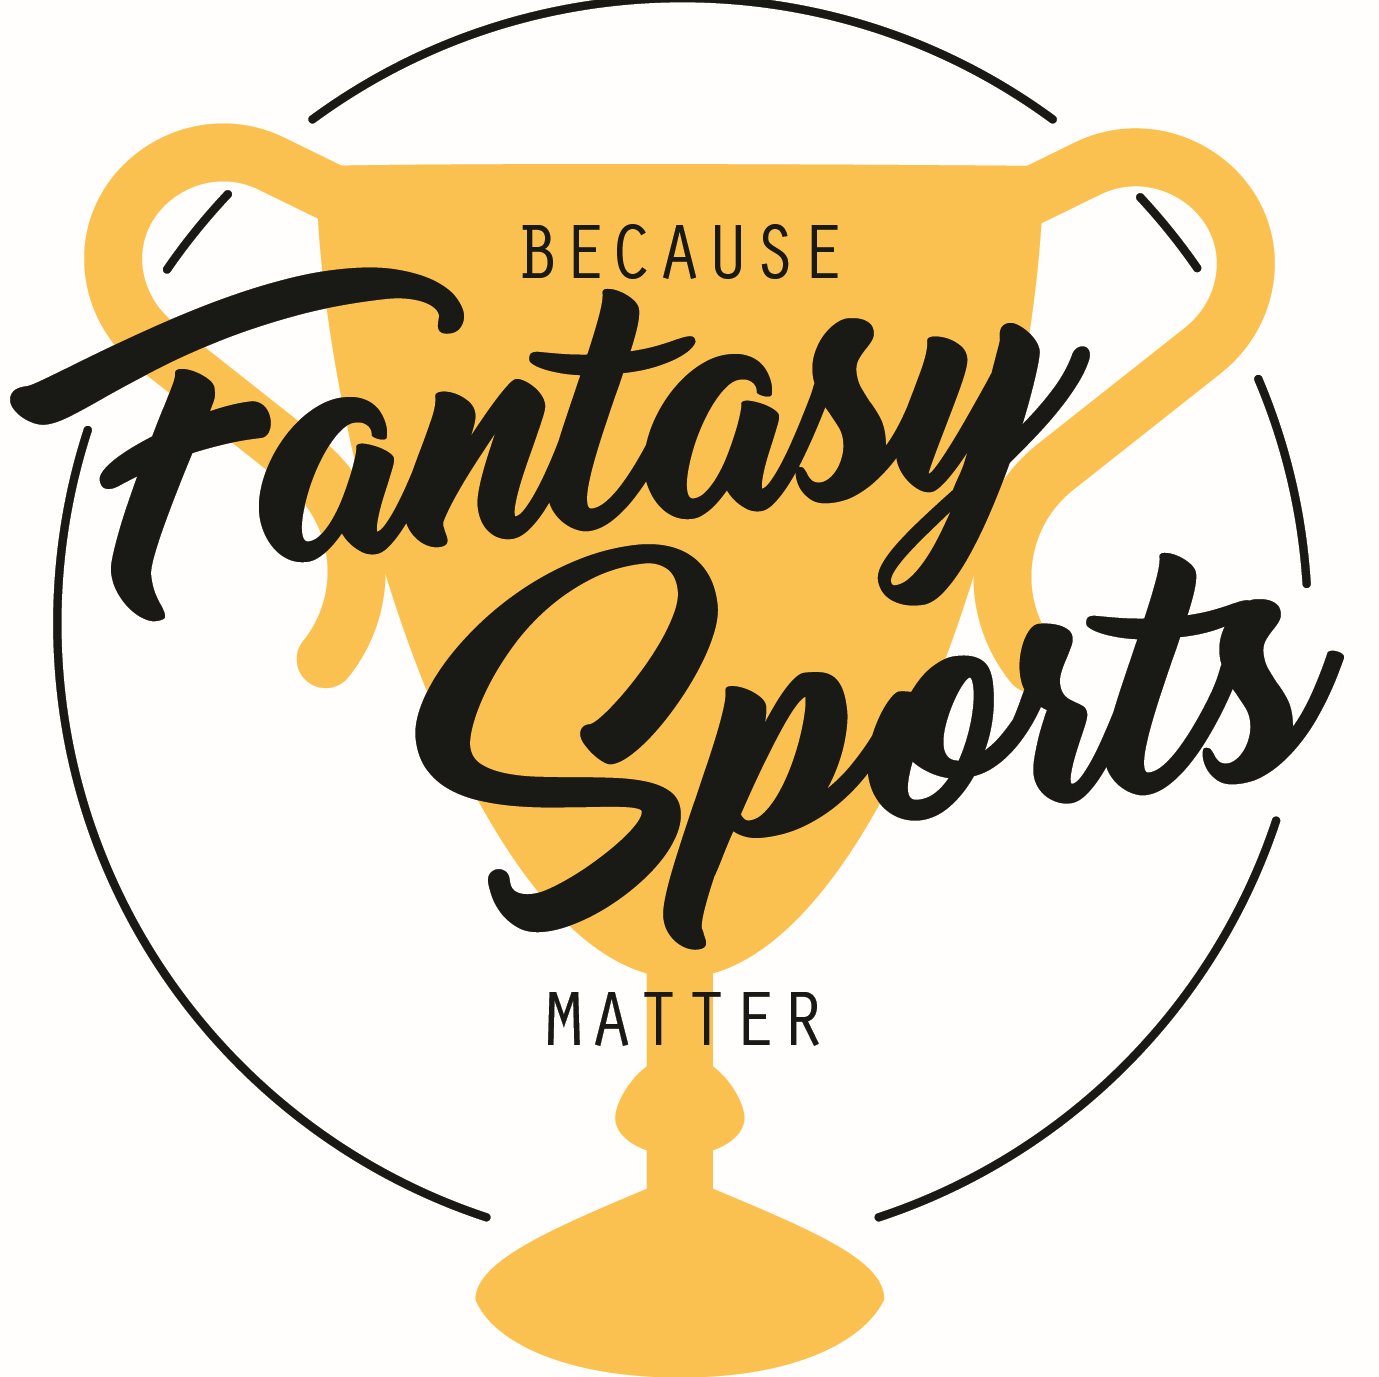 Follow closely as @brinksdaman15 and @fromdathrone take you on their journey to fantasy sports glory. From draft prep to in season execution. It's all here!